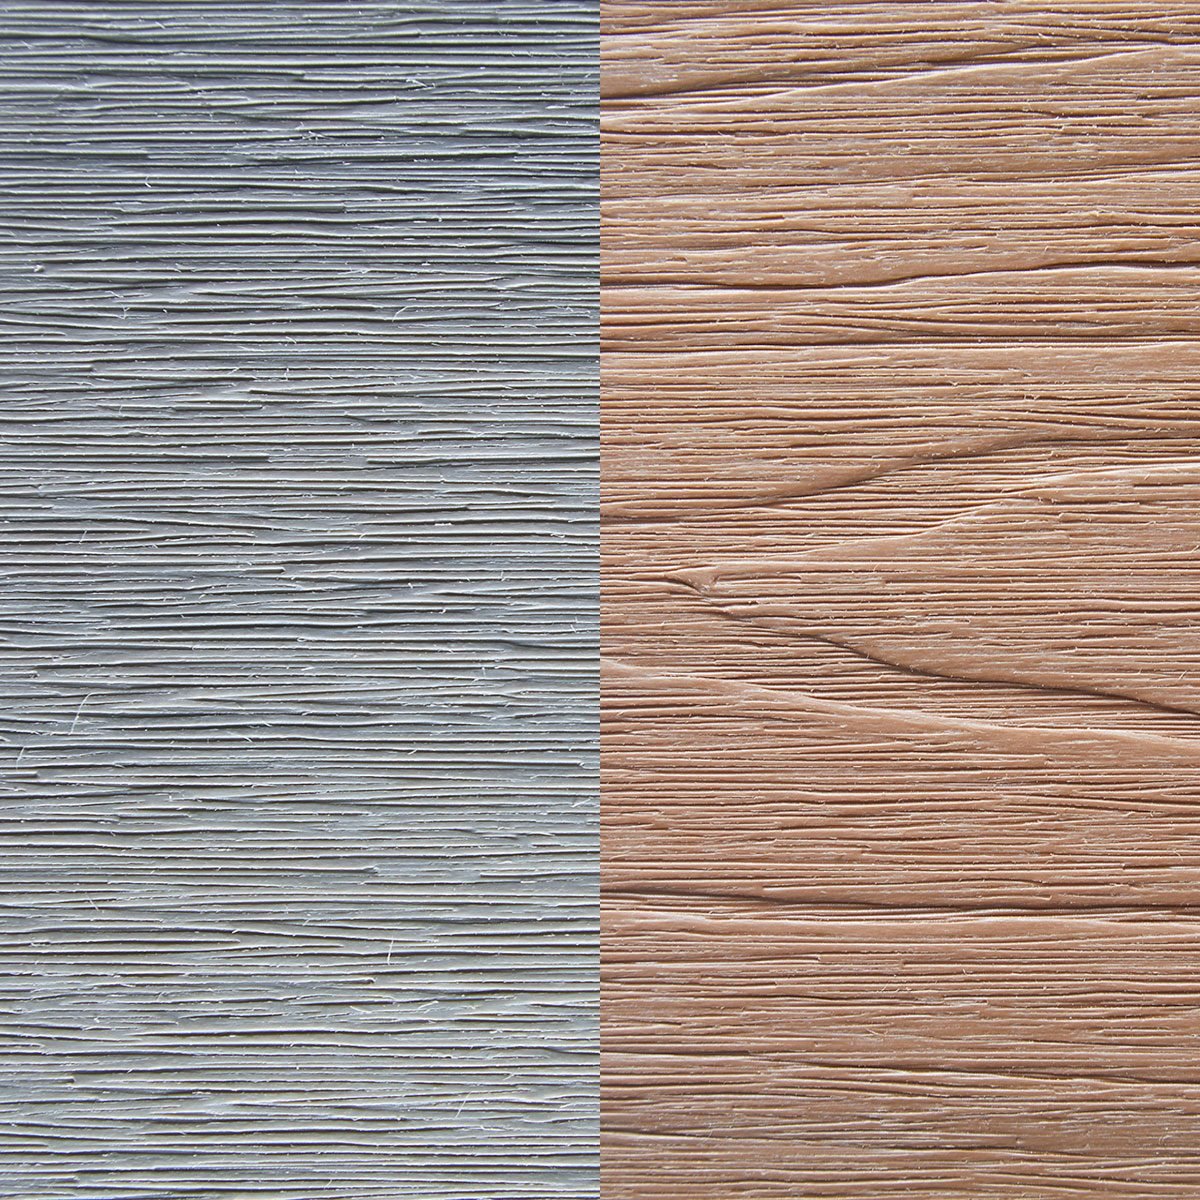 Two examples of deck color and grain | Construction Pro Tips